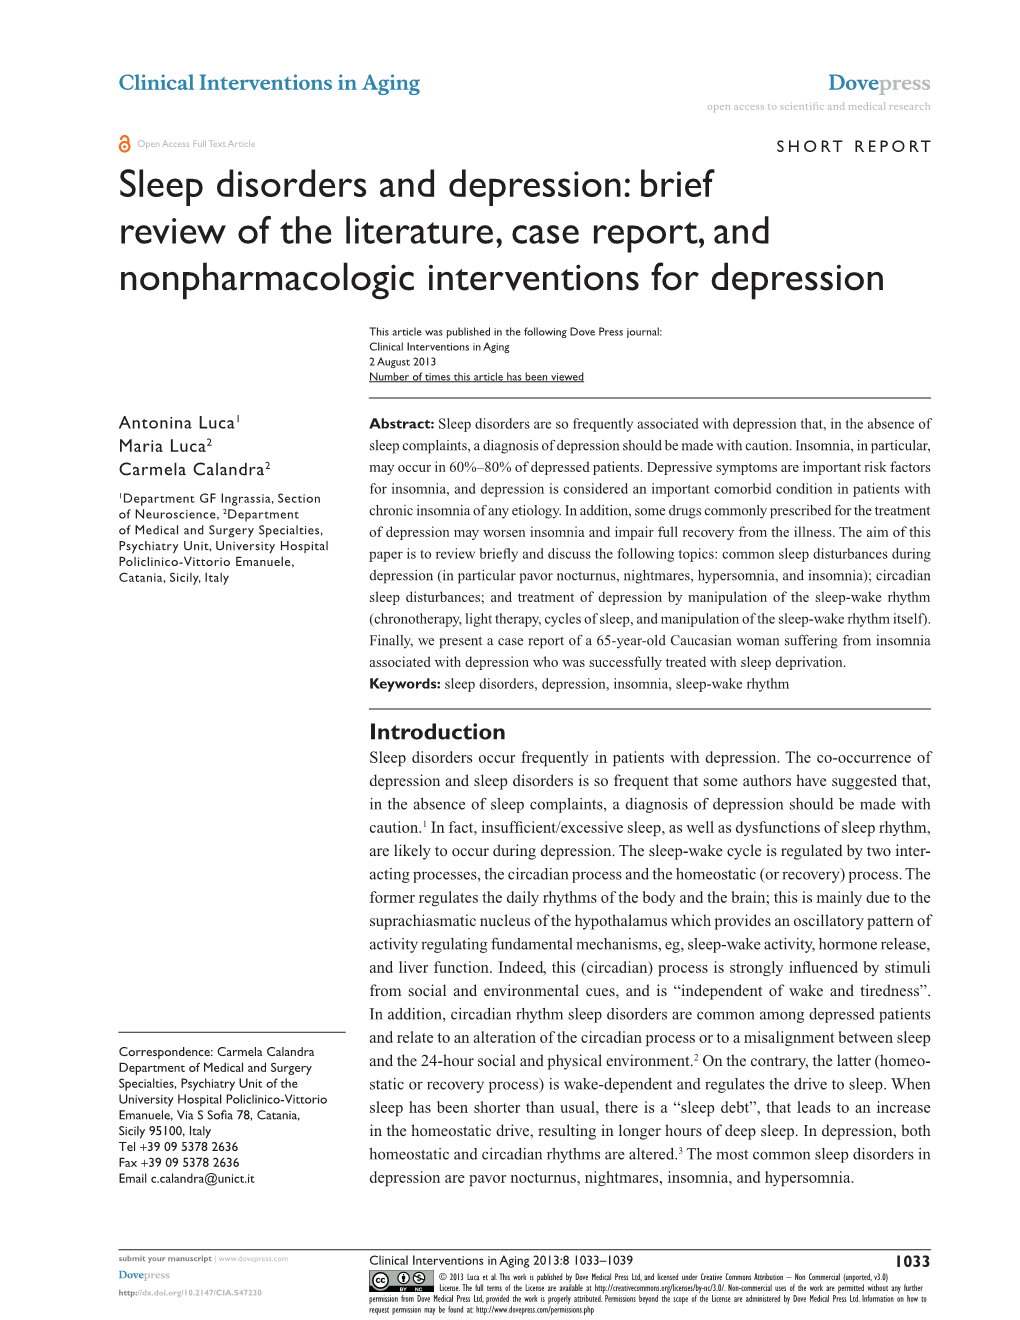 Sleep Disorders and Depression: Brief Review of the Literature, Case Report, and Nonpharmacologic Interventions for Depression